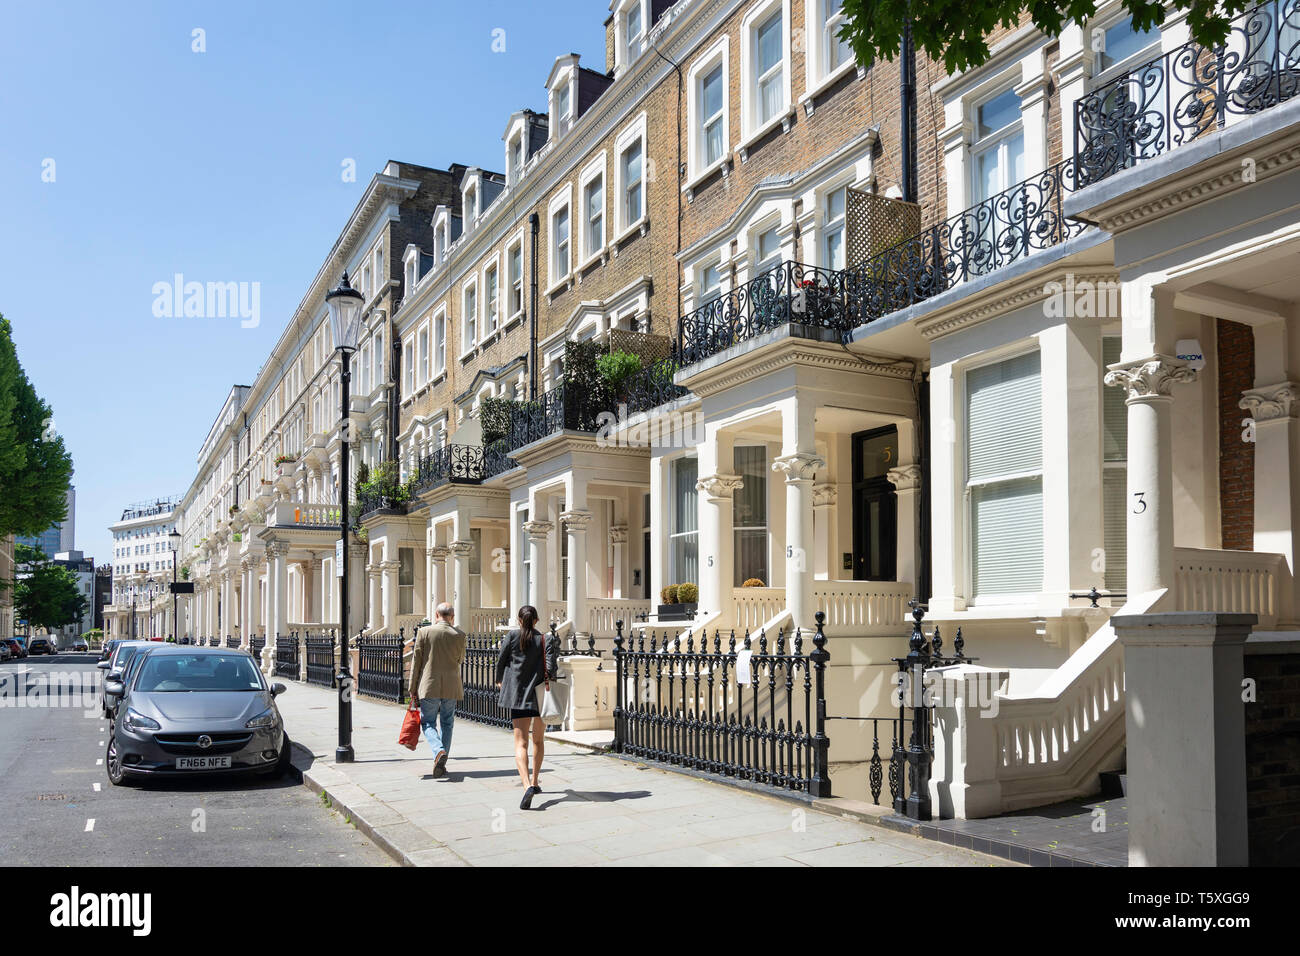 Terraced town houses, Earl's Court Square, Earls Court, Royal Borough of Kensington and Chelsea, Greater London, England, United Kingdom Stock Photo